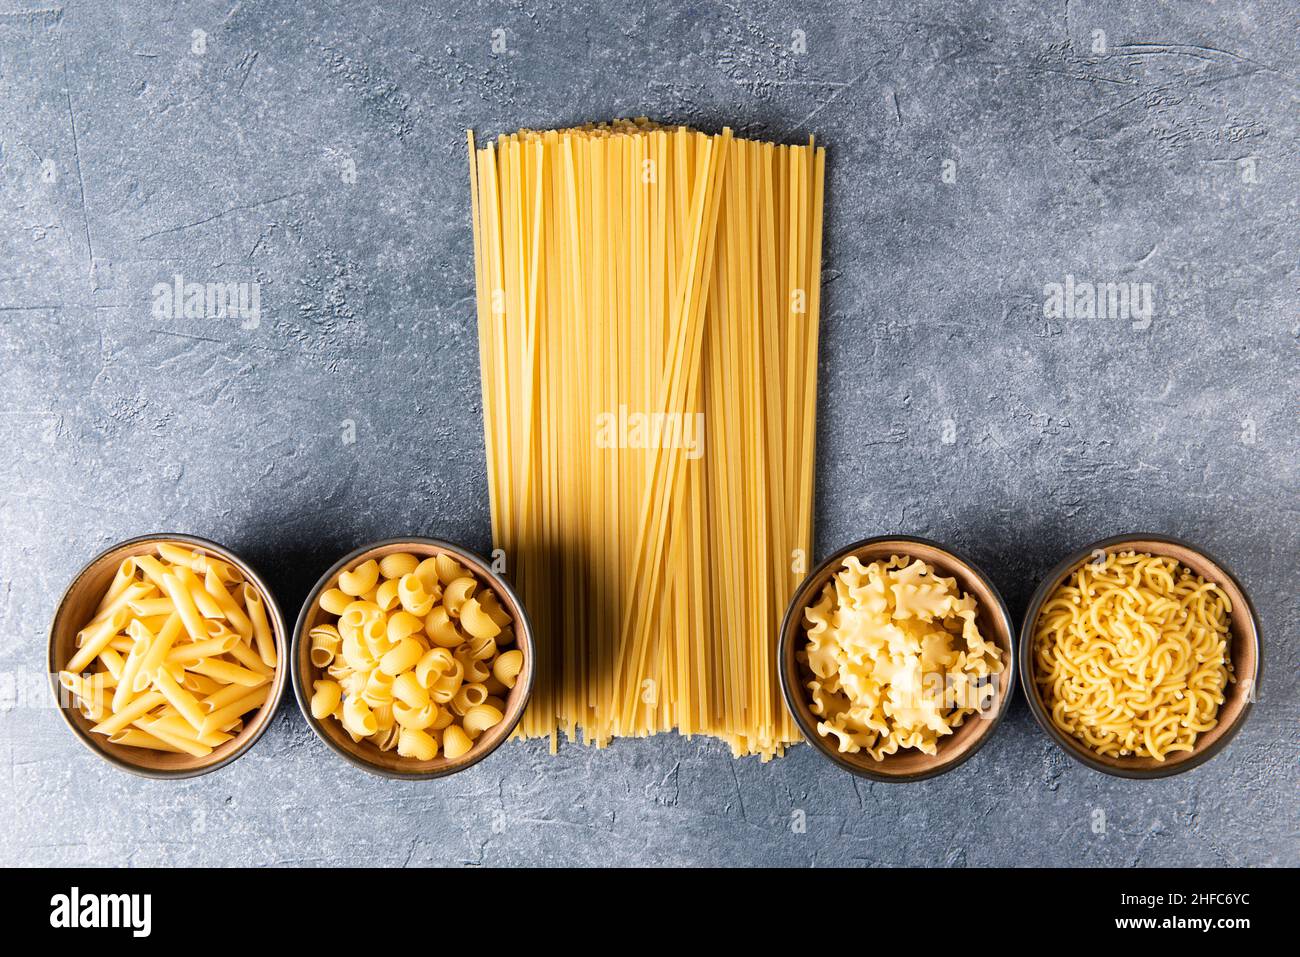 Different types of pasta on stone background Stock Photo